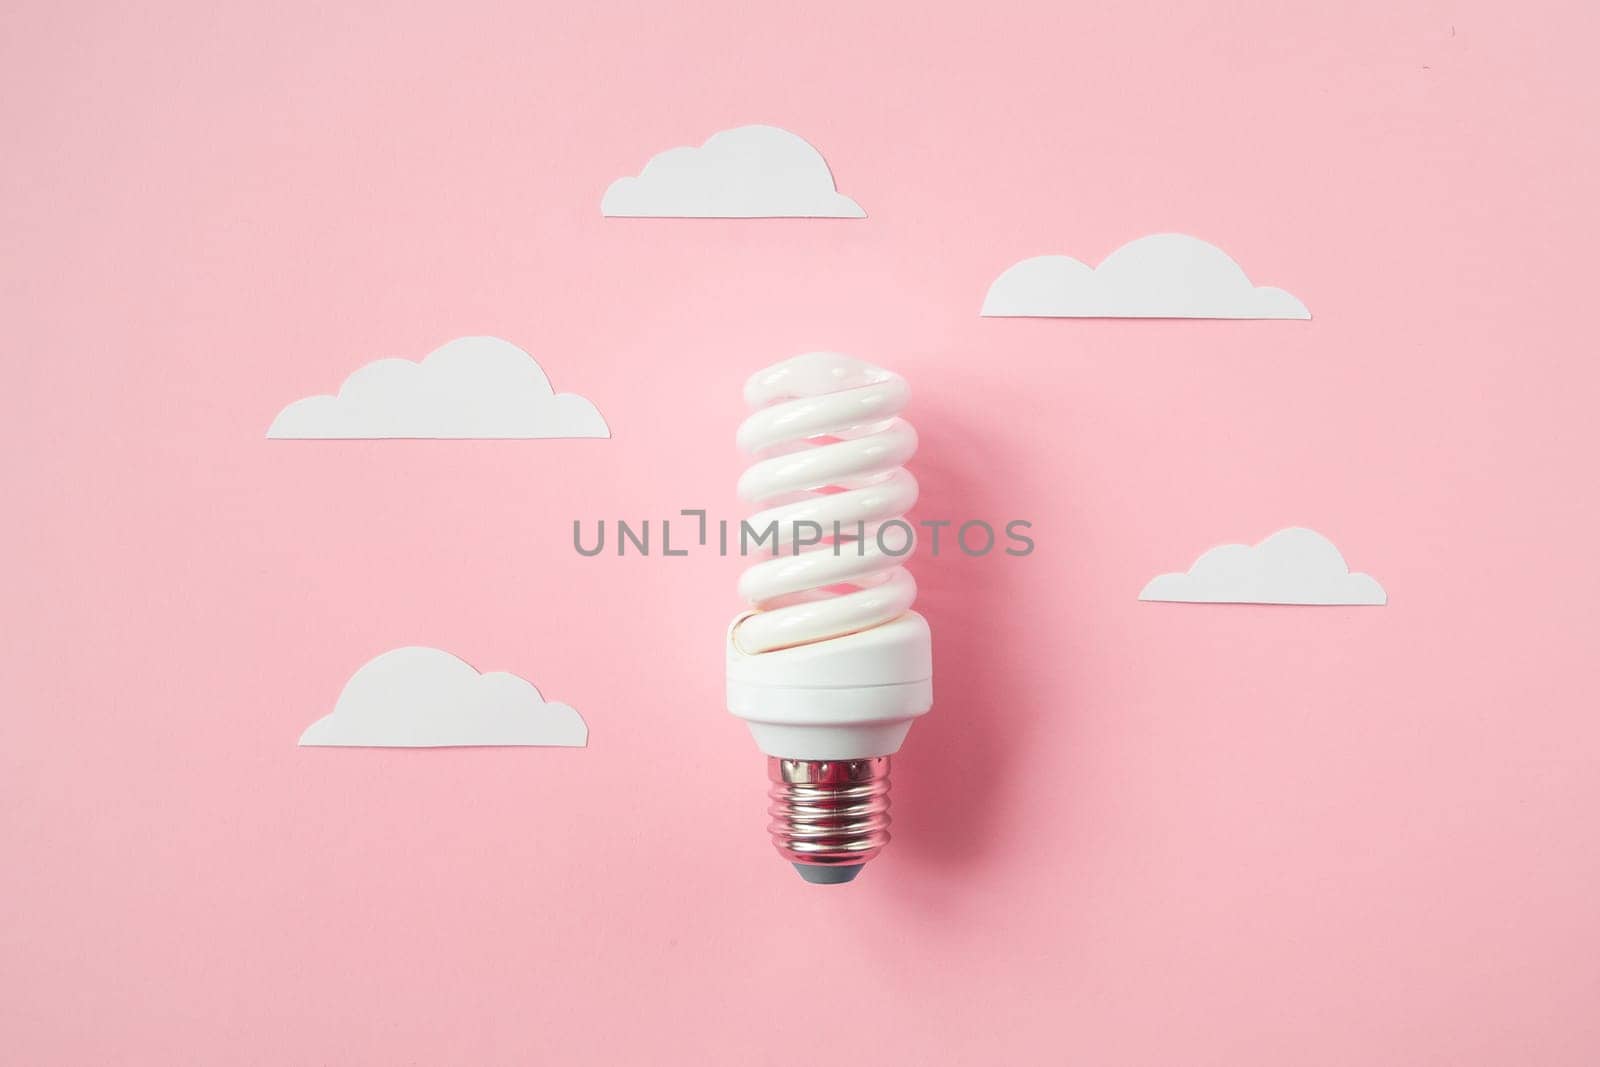 Light bulb with white cut out clouds on pink background. Idea concept. Energy and electricity. alternative energy sources. Innovation and thinking out the box symbols. Creativity and inspiration